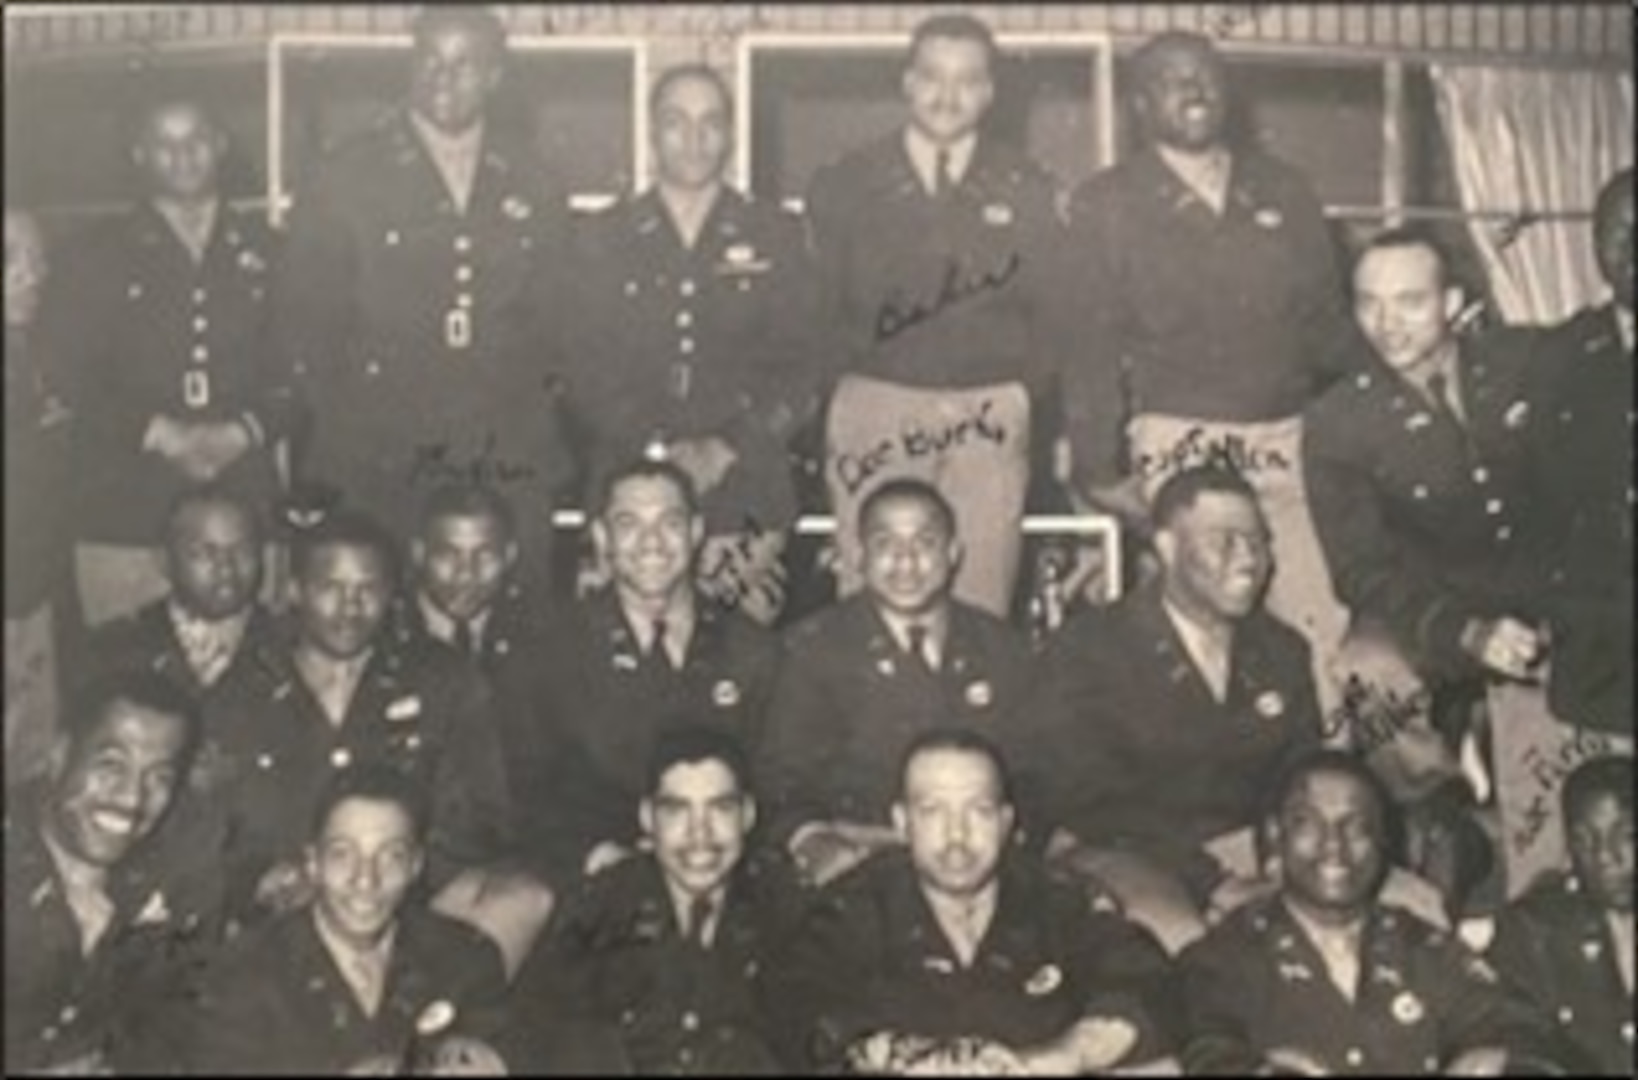 A 1945 photograph showing members of the U.S. Army’s Triple Nickels. (Army Special Operations Museum)